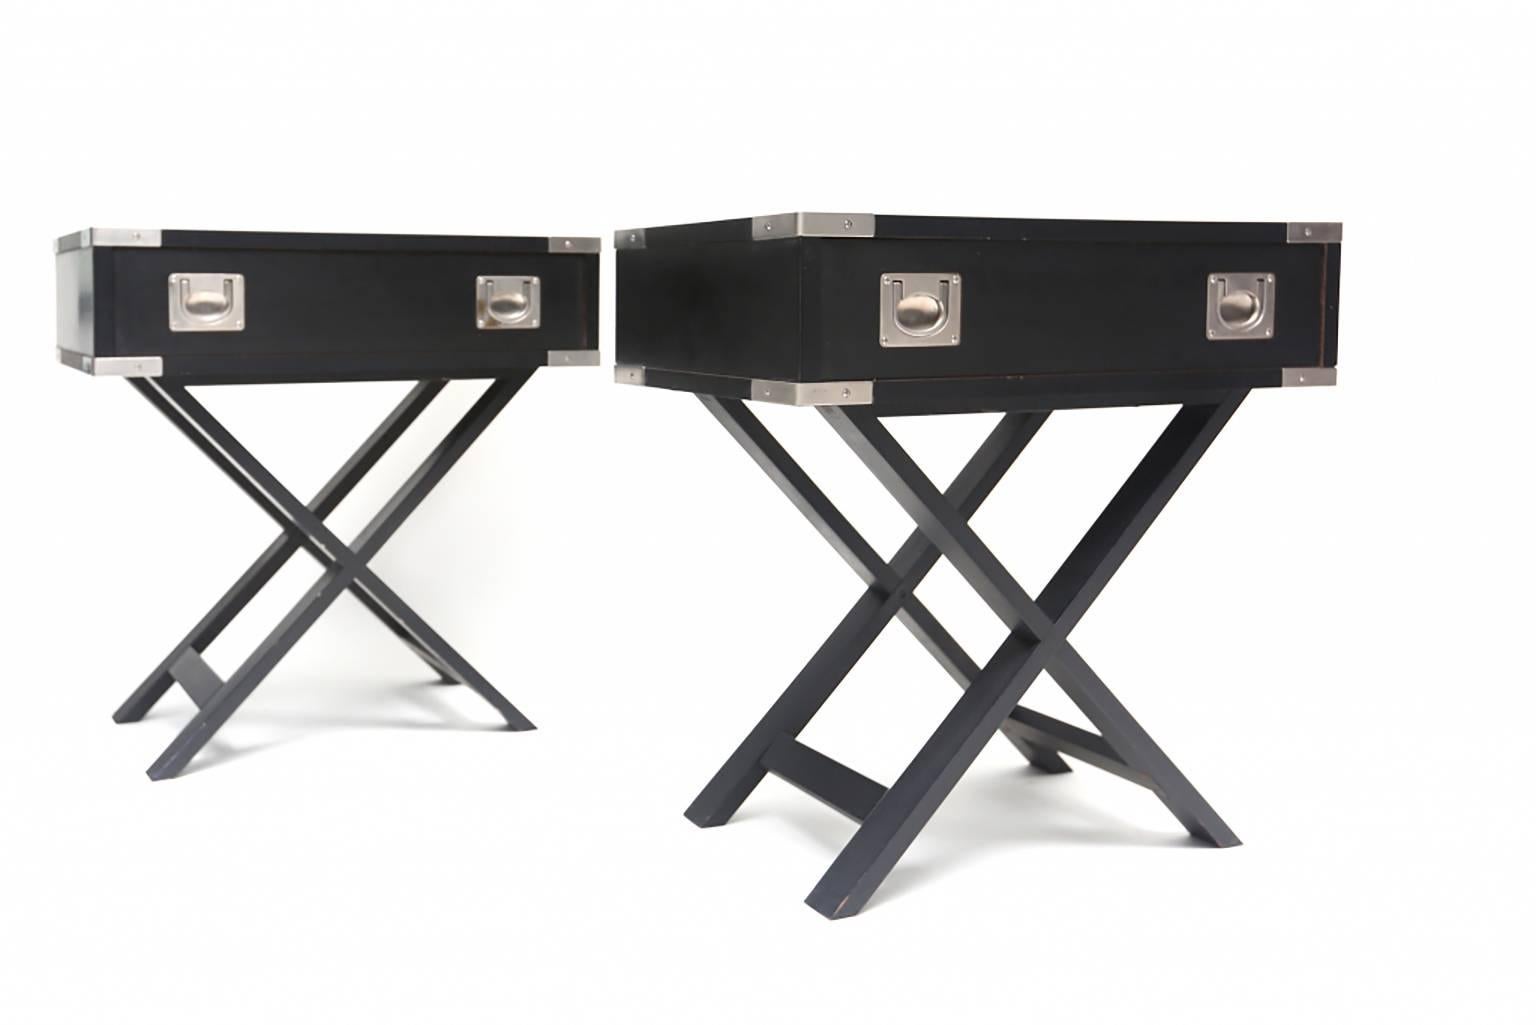 Midcentury pair of black side tables with nickeled brass details,

circa 1980, Italy

Measures: L 60 cm, H 60 cm, D 35 cm.